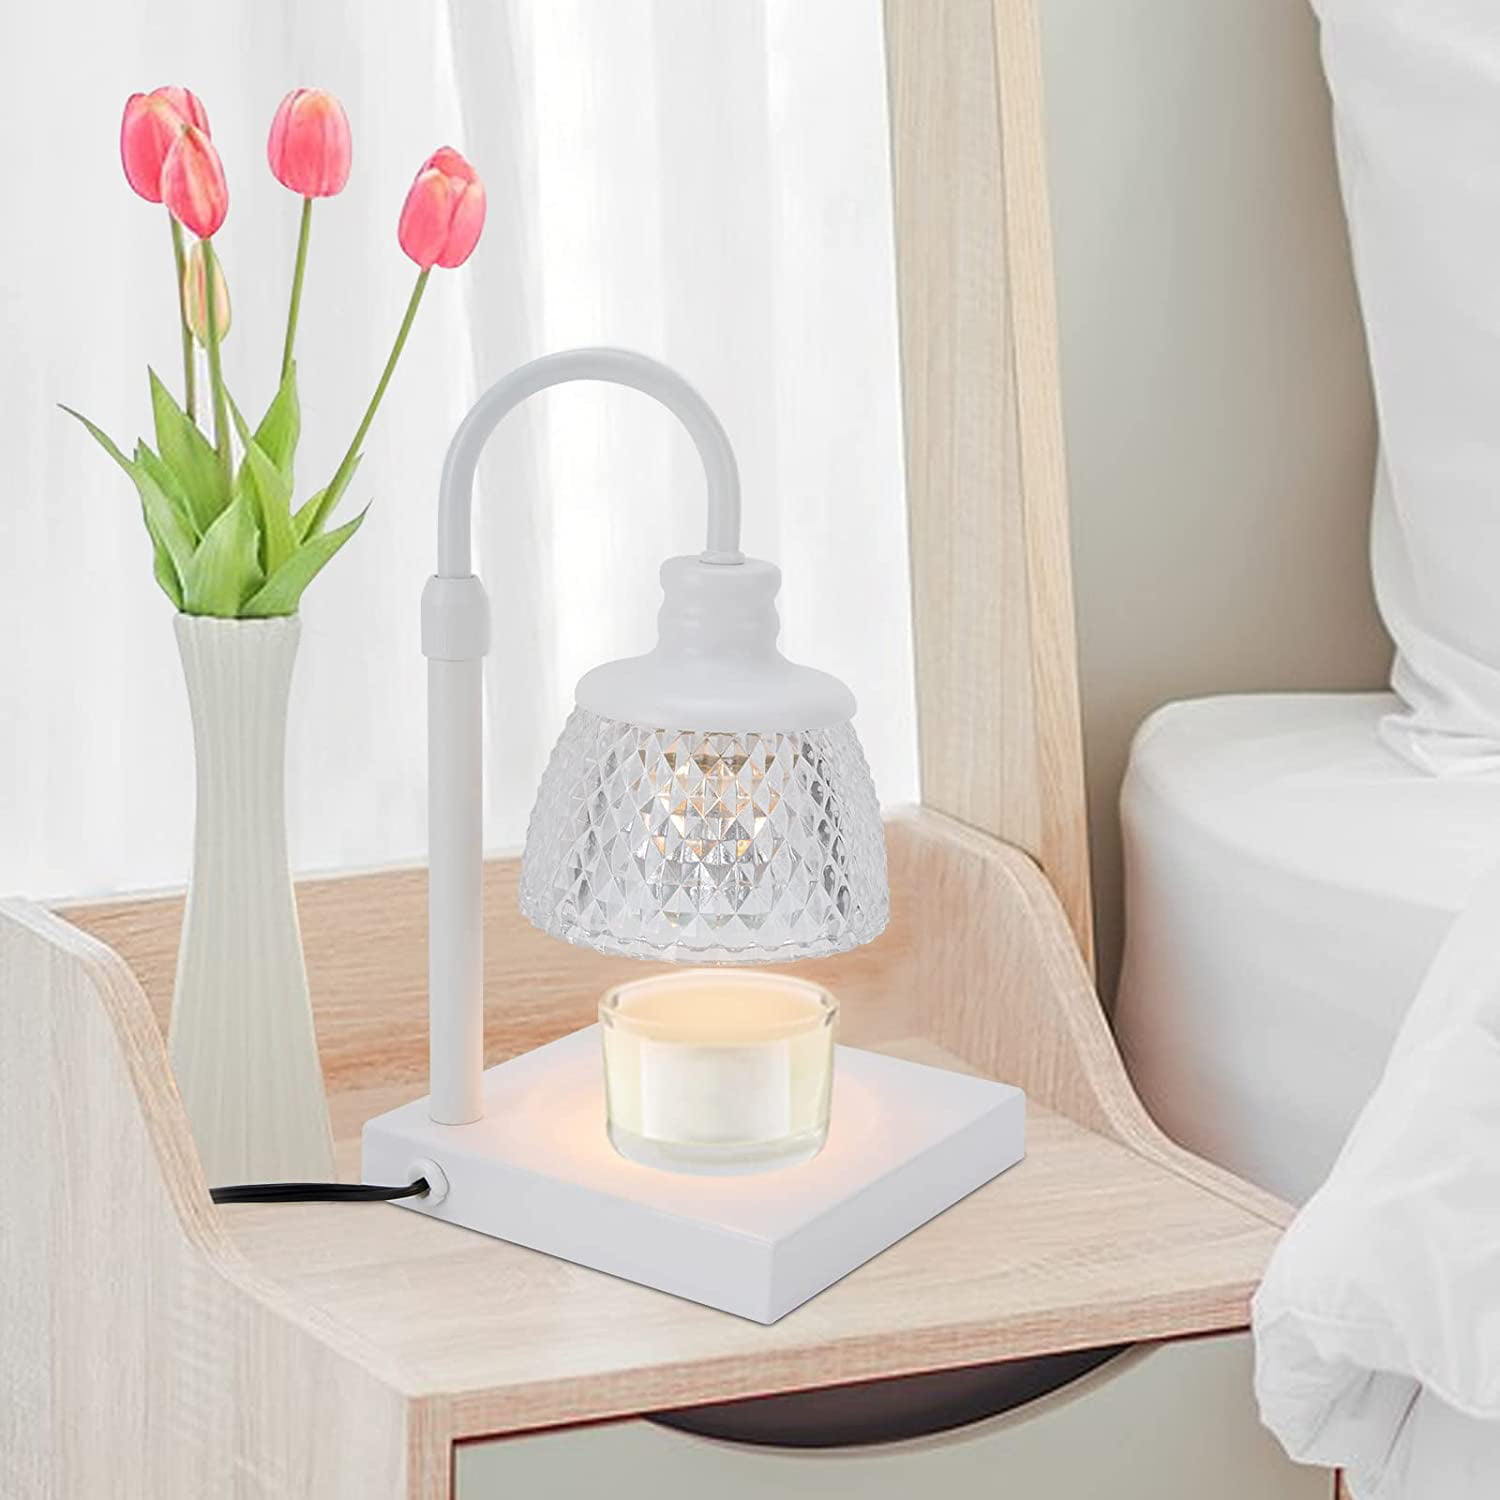 ZebraUp Candle Warmer Lamp for Scented Jar Candle Melter